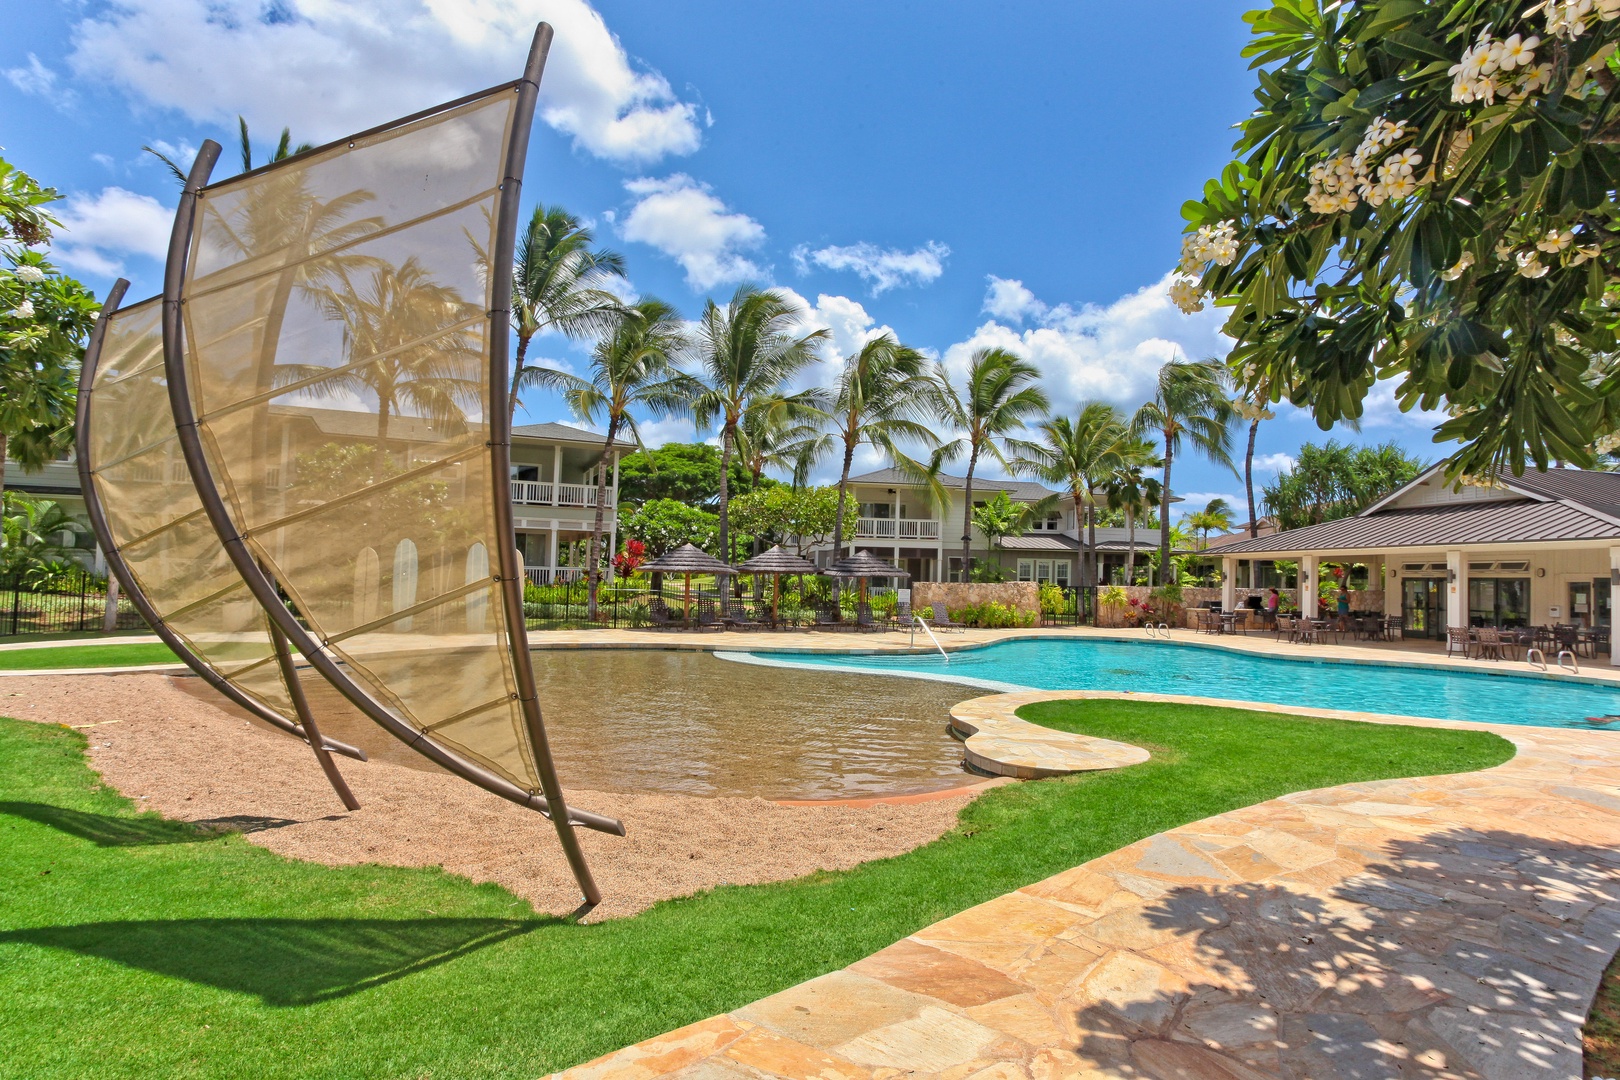 Kapolei Vacation Rentals, Coconut Plantation 1194-3 - Go for a swim in the sparkling waters and rest in the lounge chairs at the community pool.